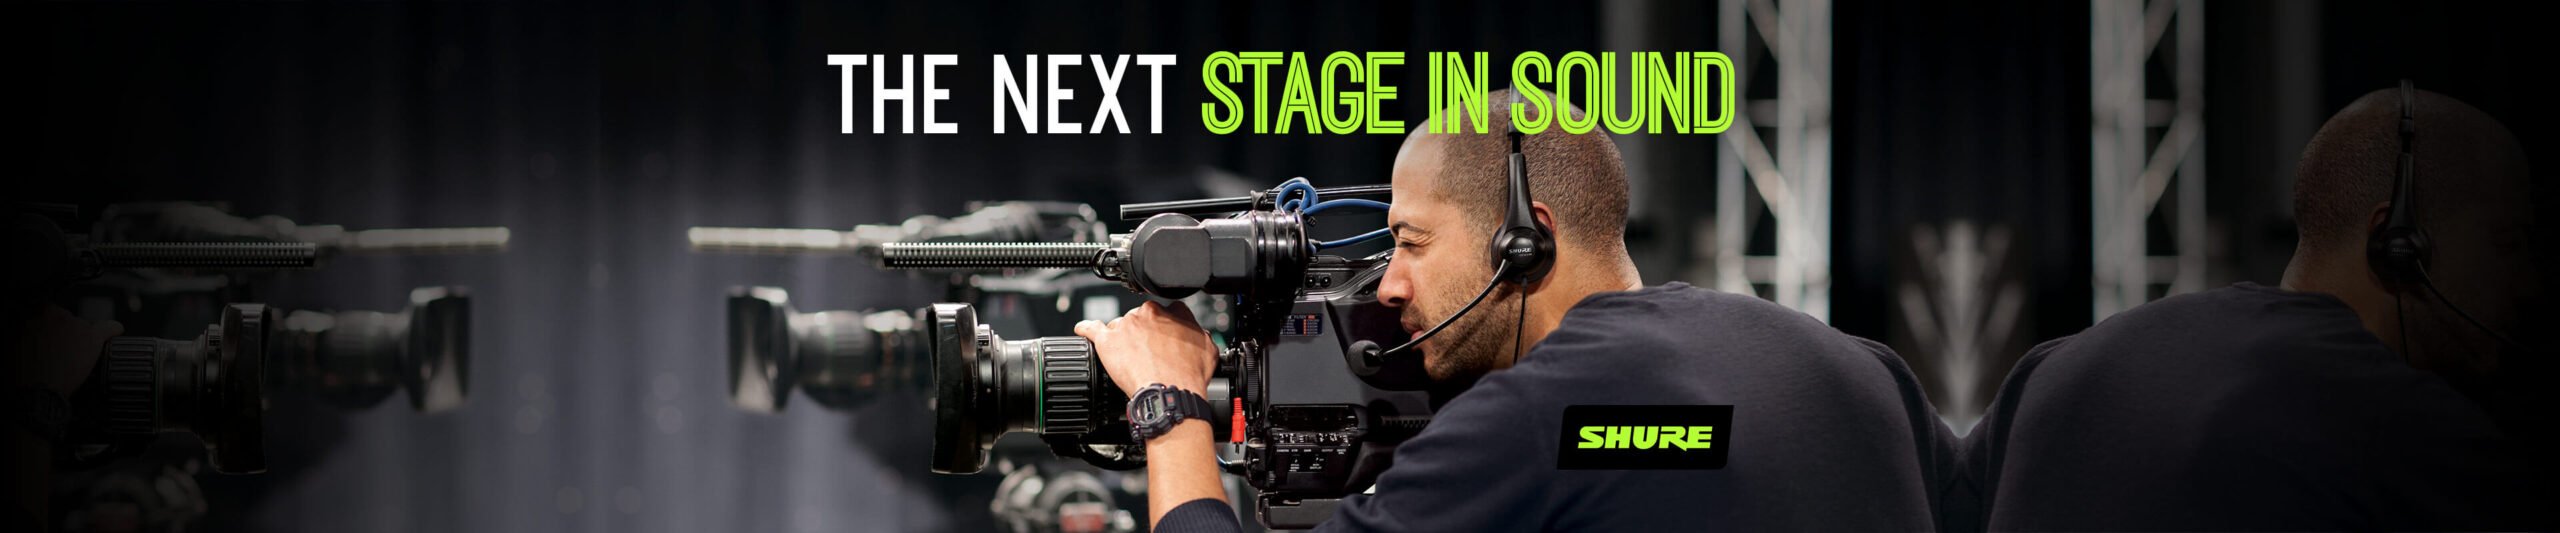 The-next-stage-in-sound-Shure